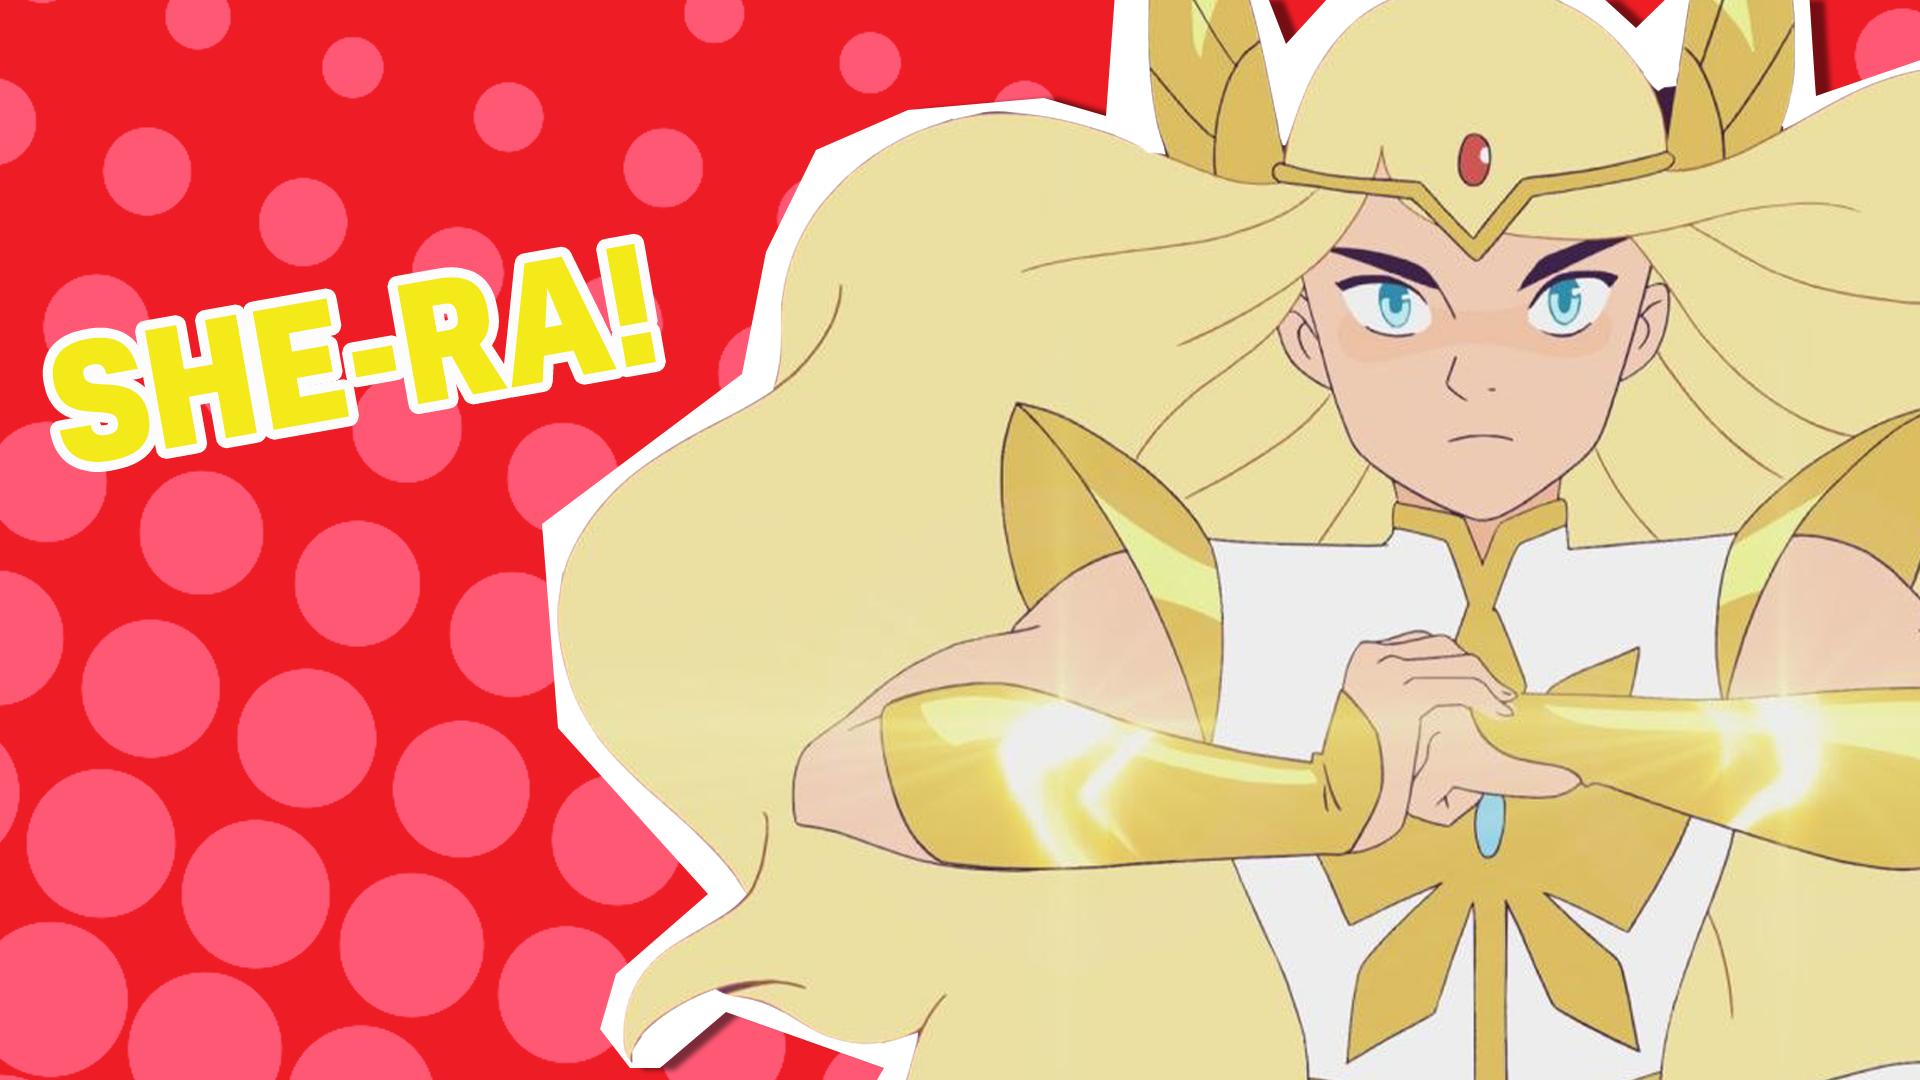 You should watch She-Ra! You're in the mood for friendship and adventure, AND magic swords! This has all three!